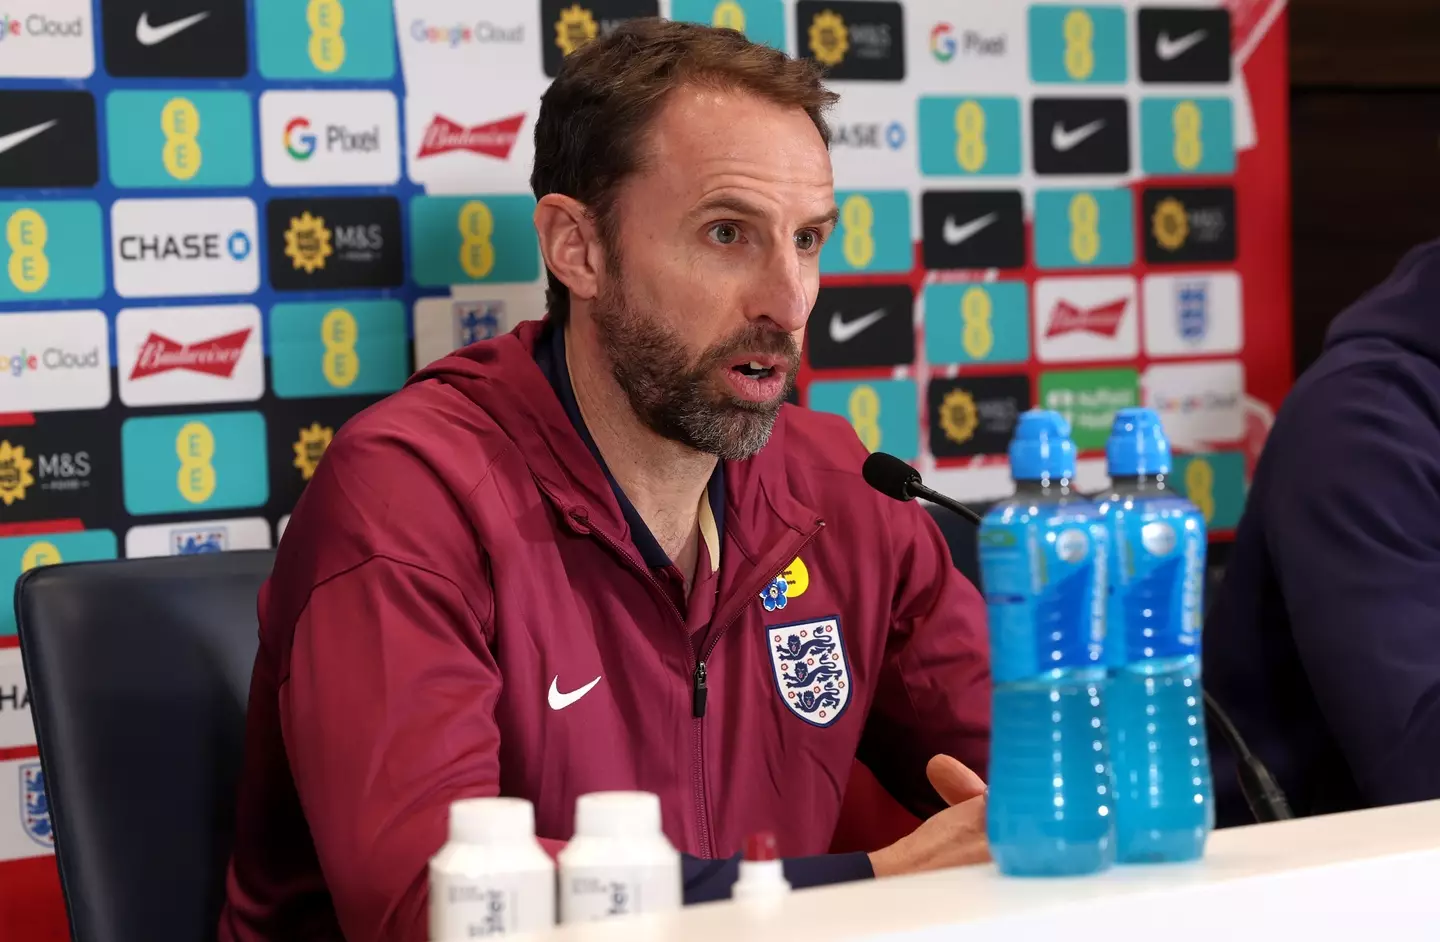 Southgate pushed back against reports linking him to Man Utd (Getty)